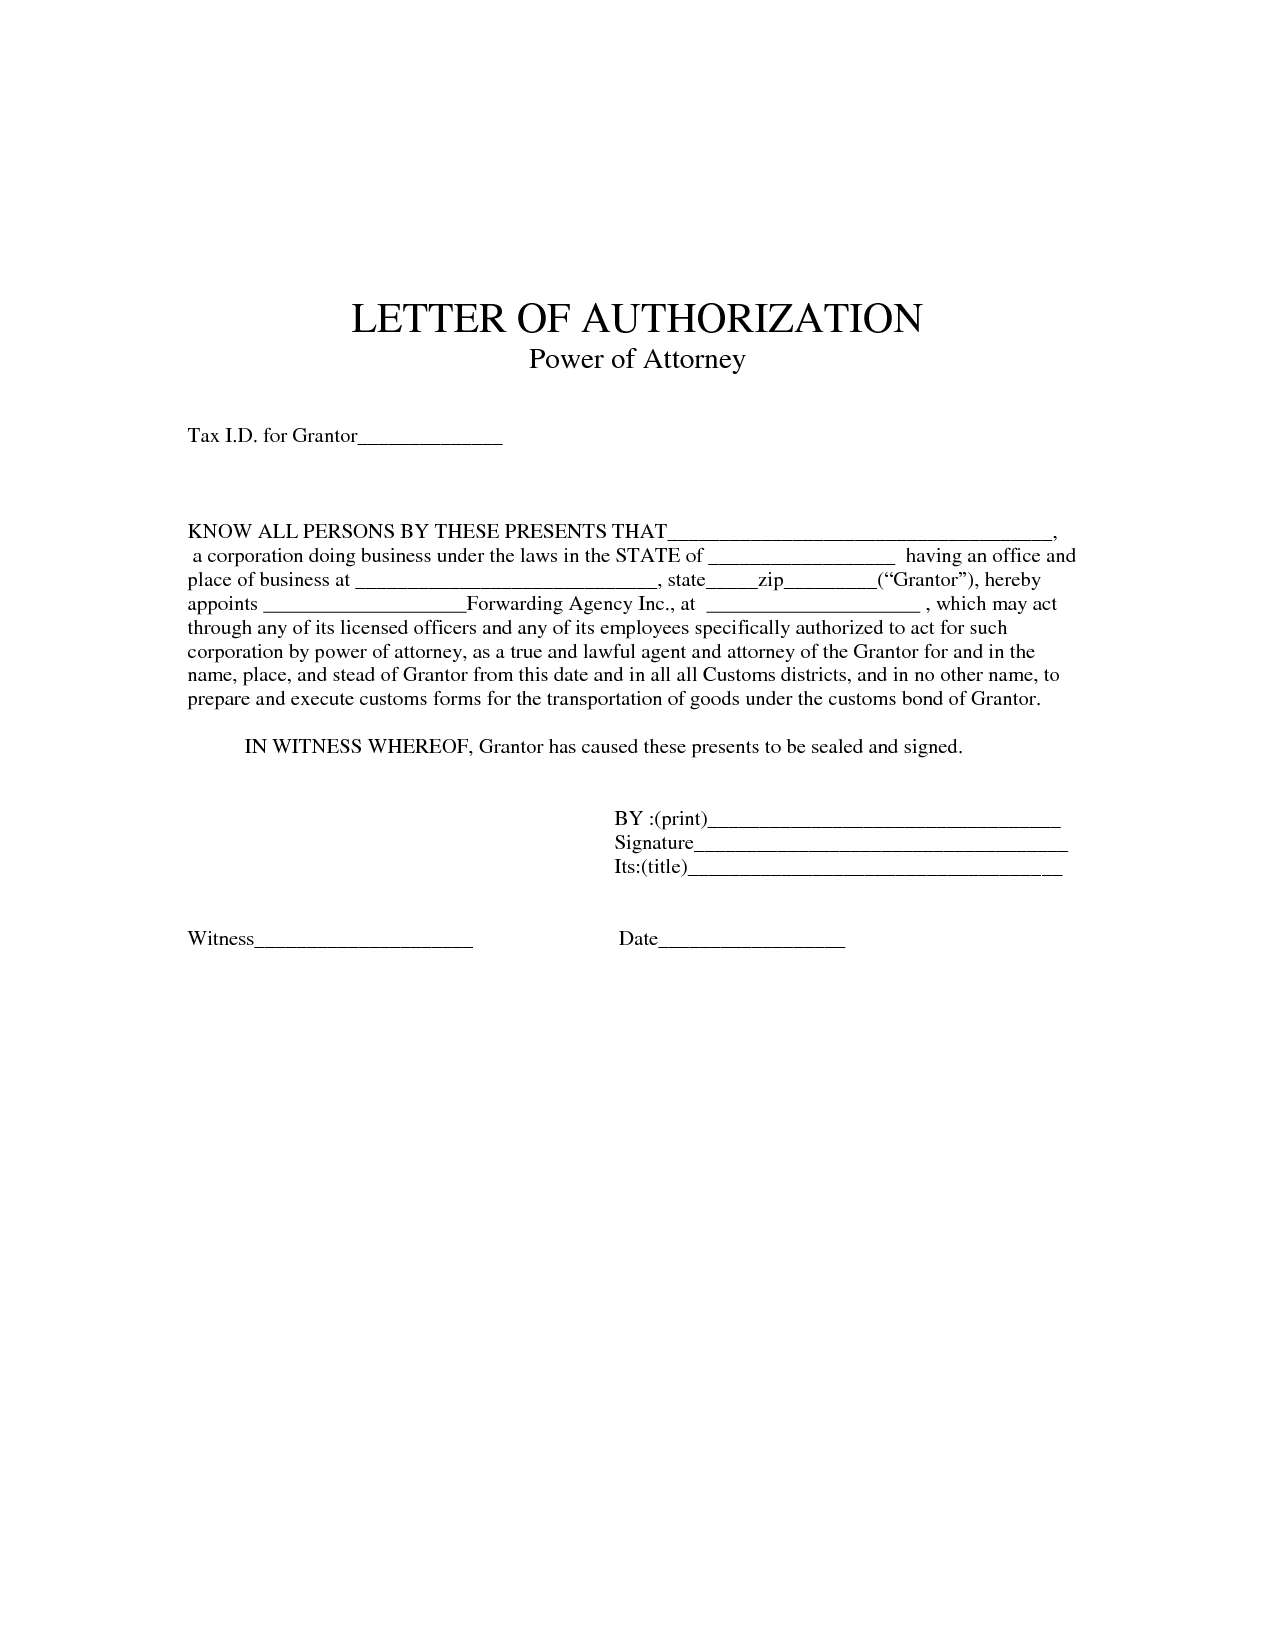 Power of authorization letter